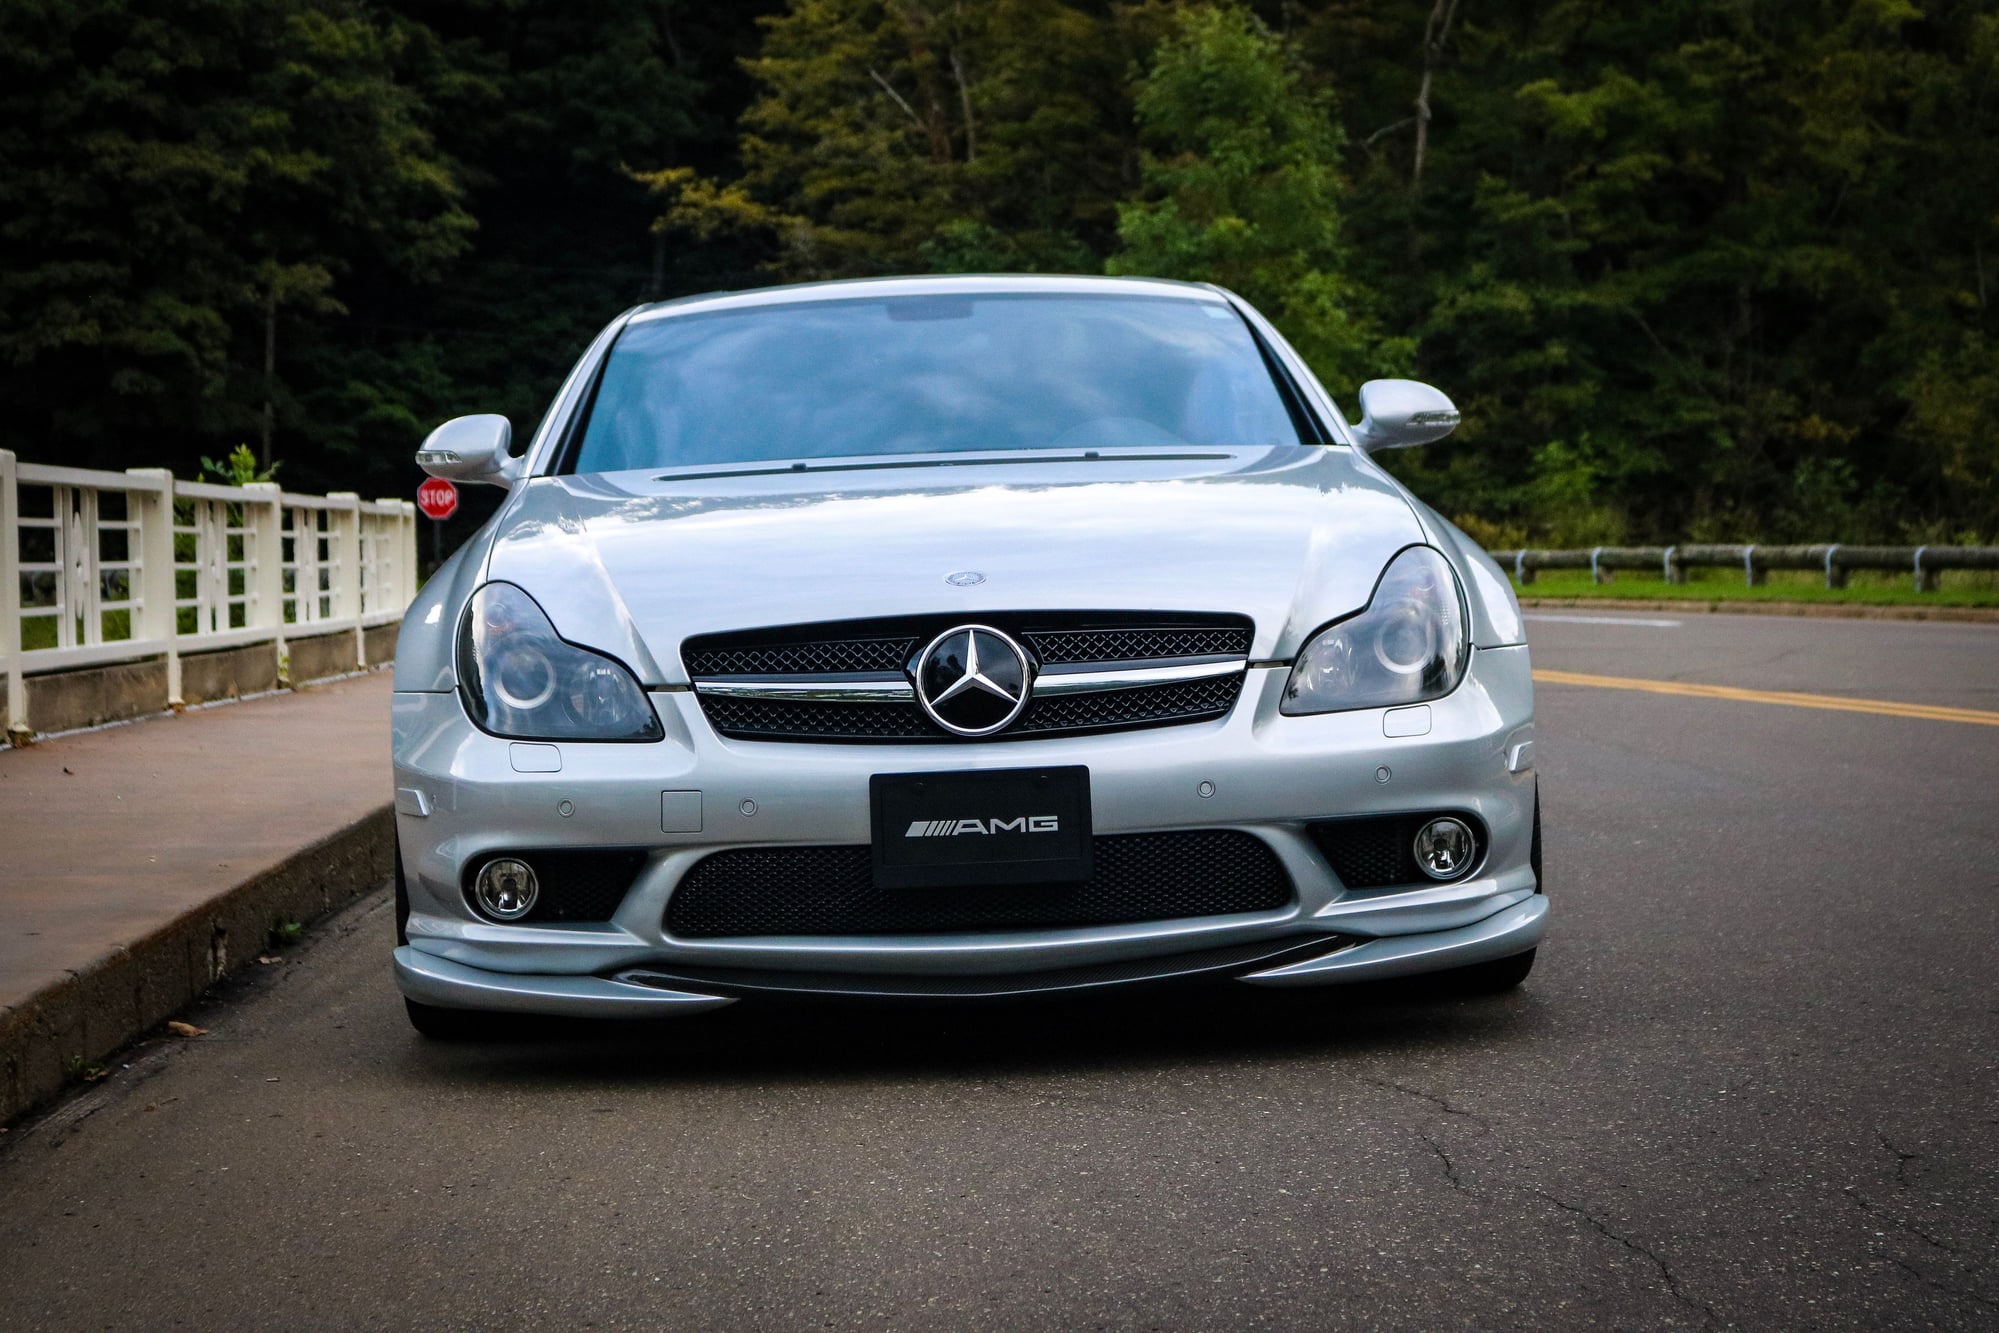 2006 Mercedes-Benz CLS55 AMG - 2006 Mercedes CLS55 AMG *Cleanest on the Market* - Used - VIN wdddj76x86a056823 - 8 cyl - Automatic - Silver - Canfield, OH 44406, United States